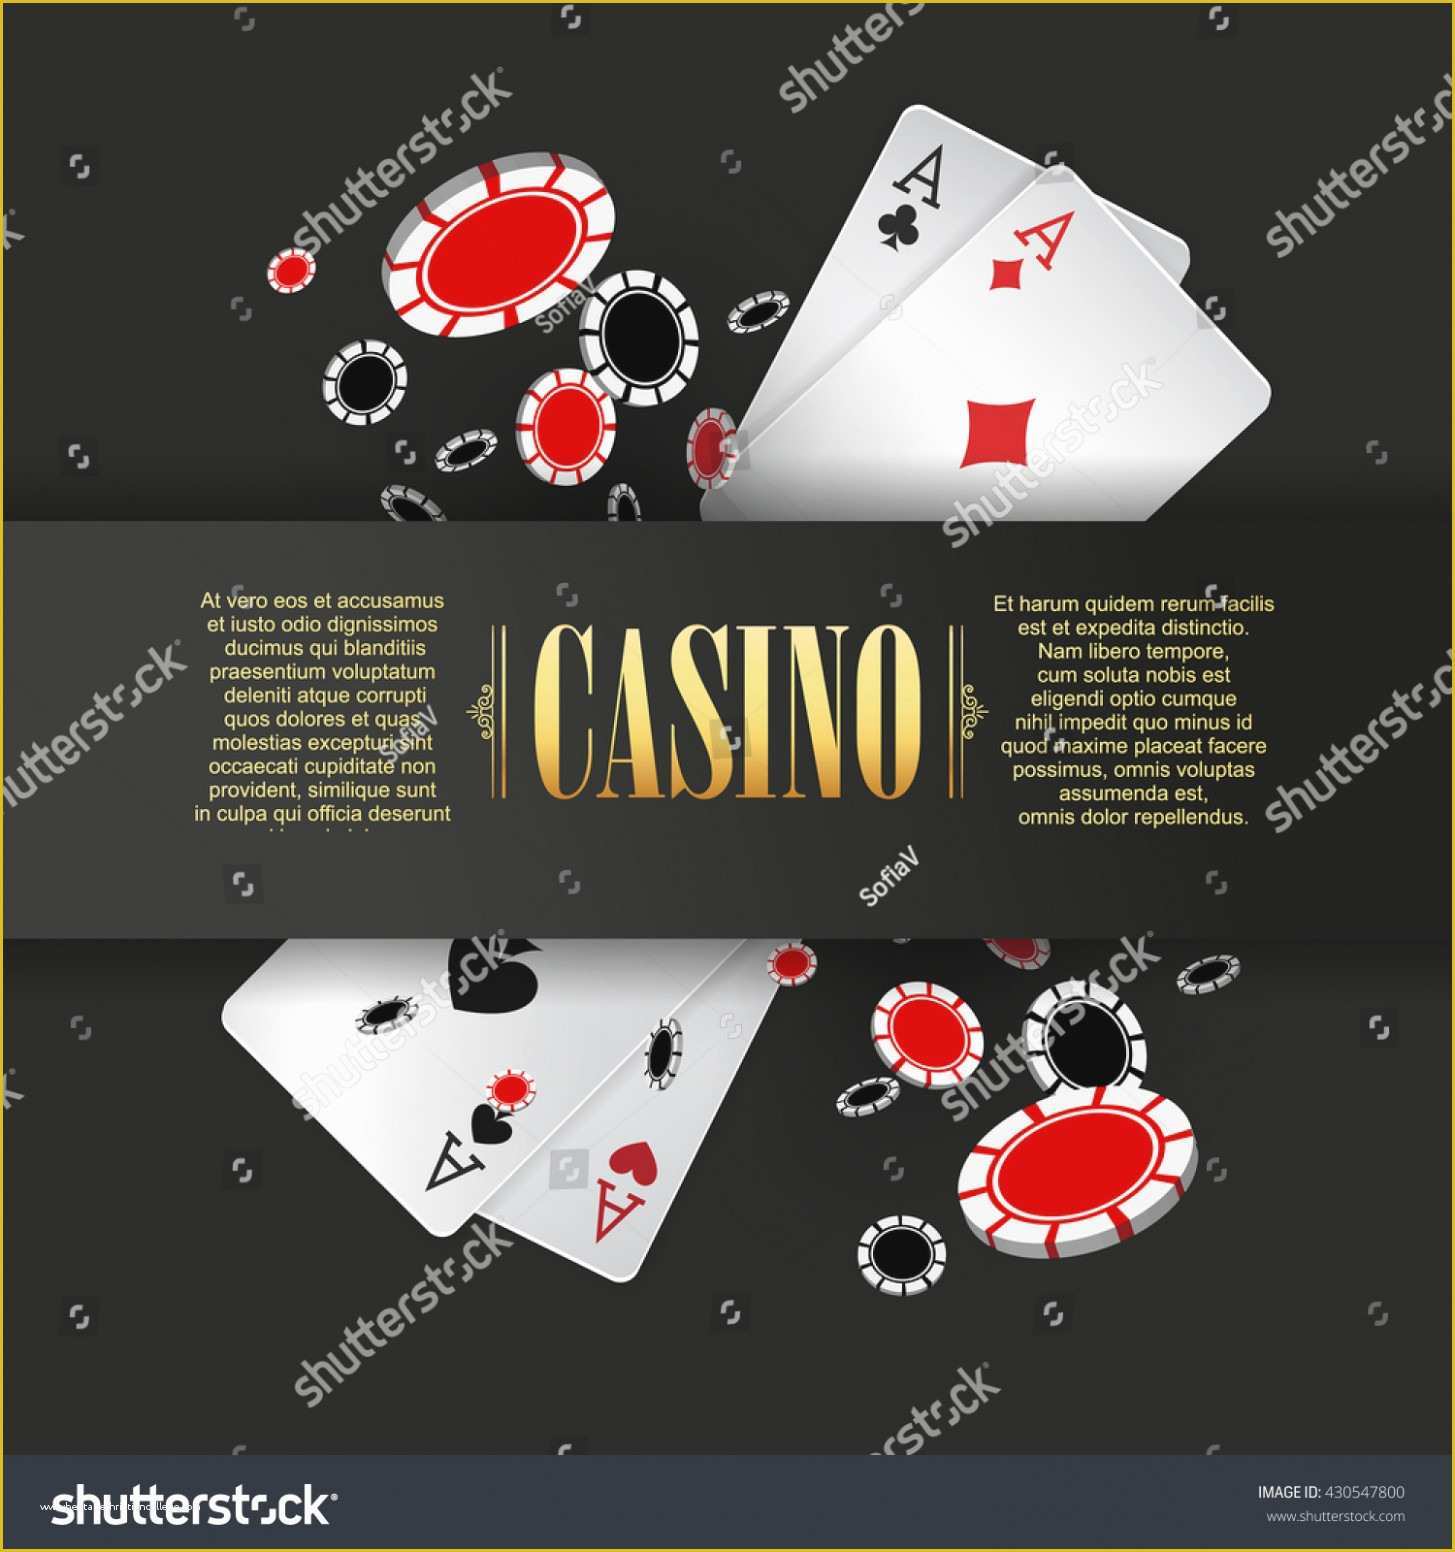 Free Poker Chip Template Of the Real Reason Behind Poker